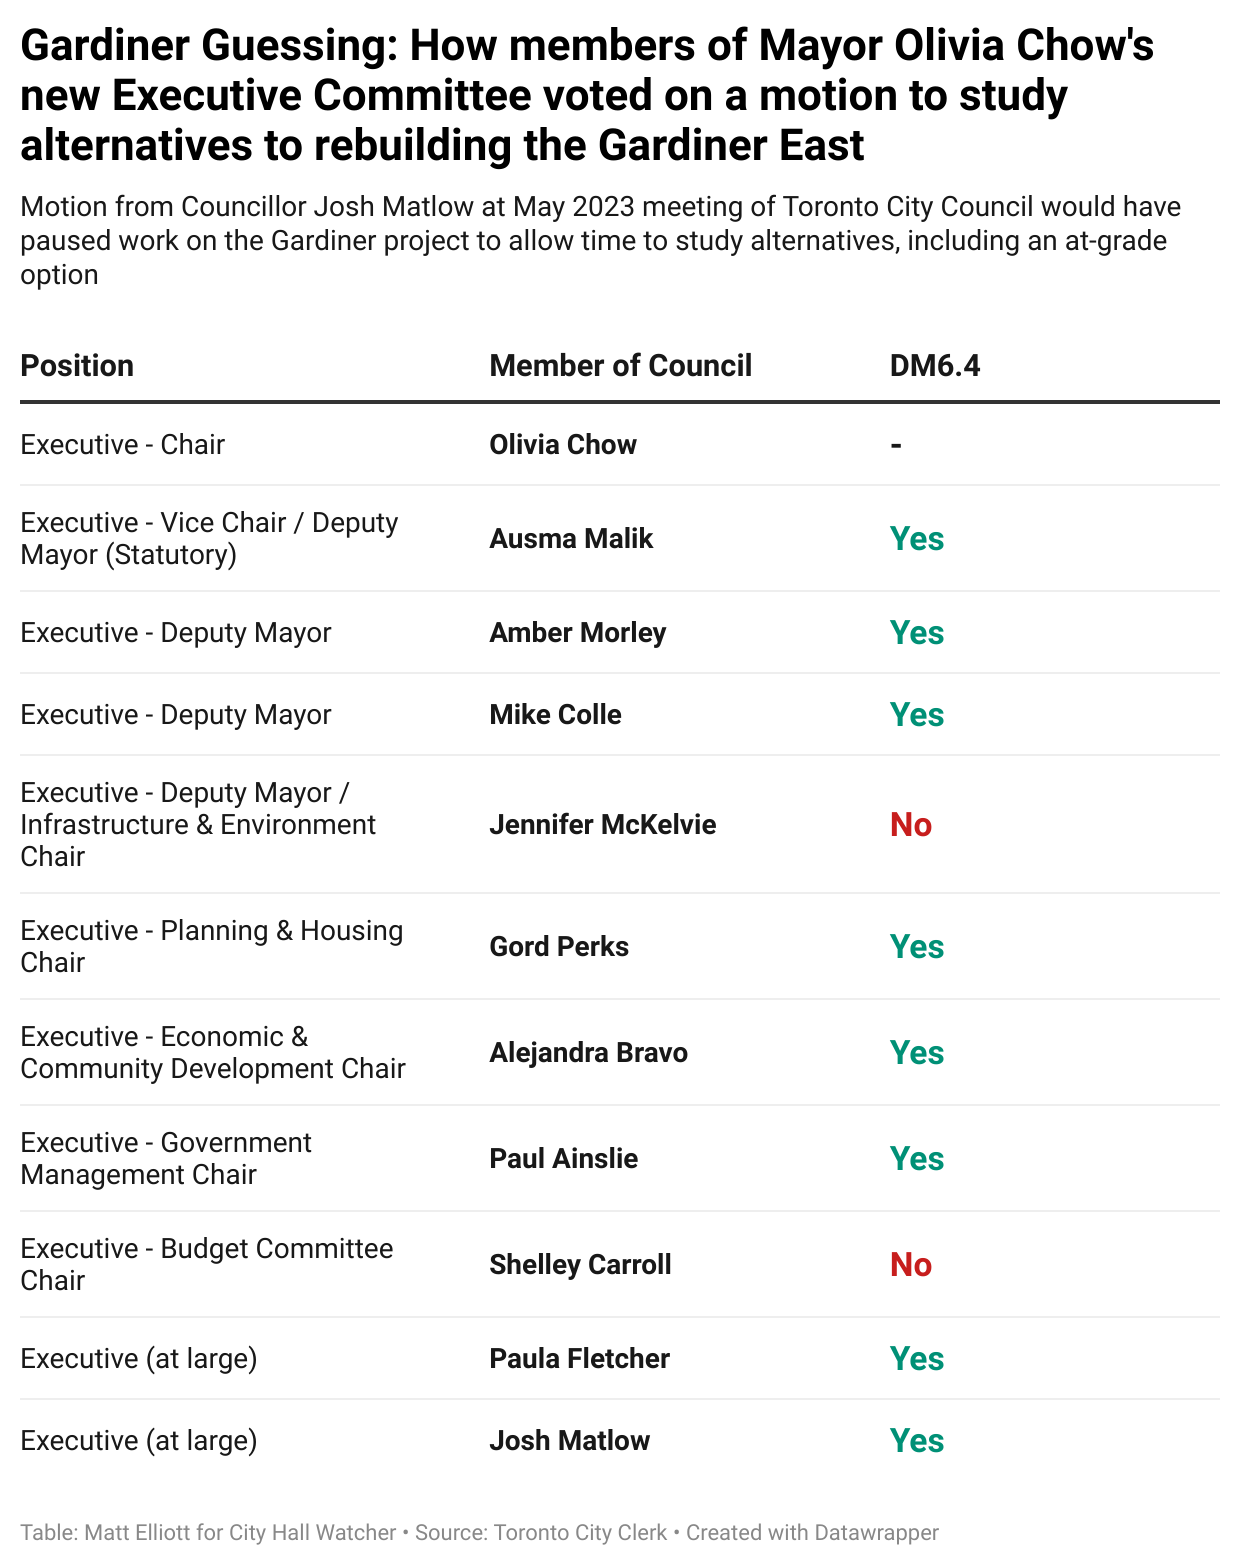 Data table, text version in caption, showing how members of Chow's new Executive Committee voted on an item to reconsider the Gardiner East decision.